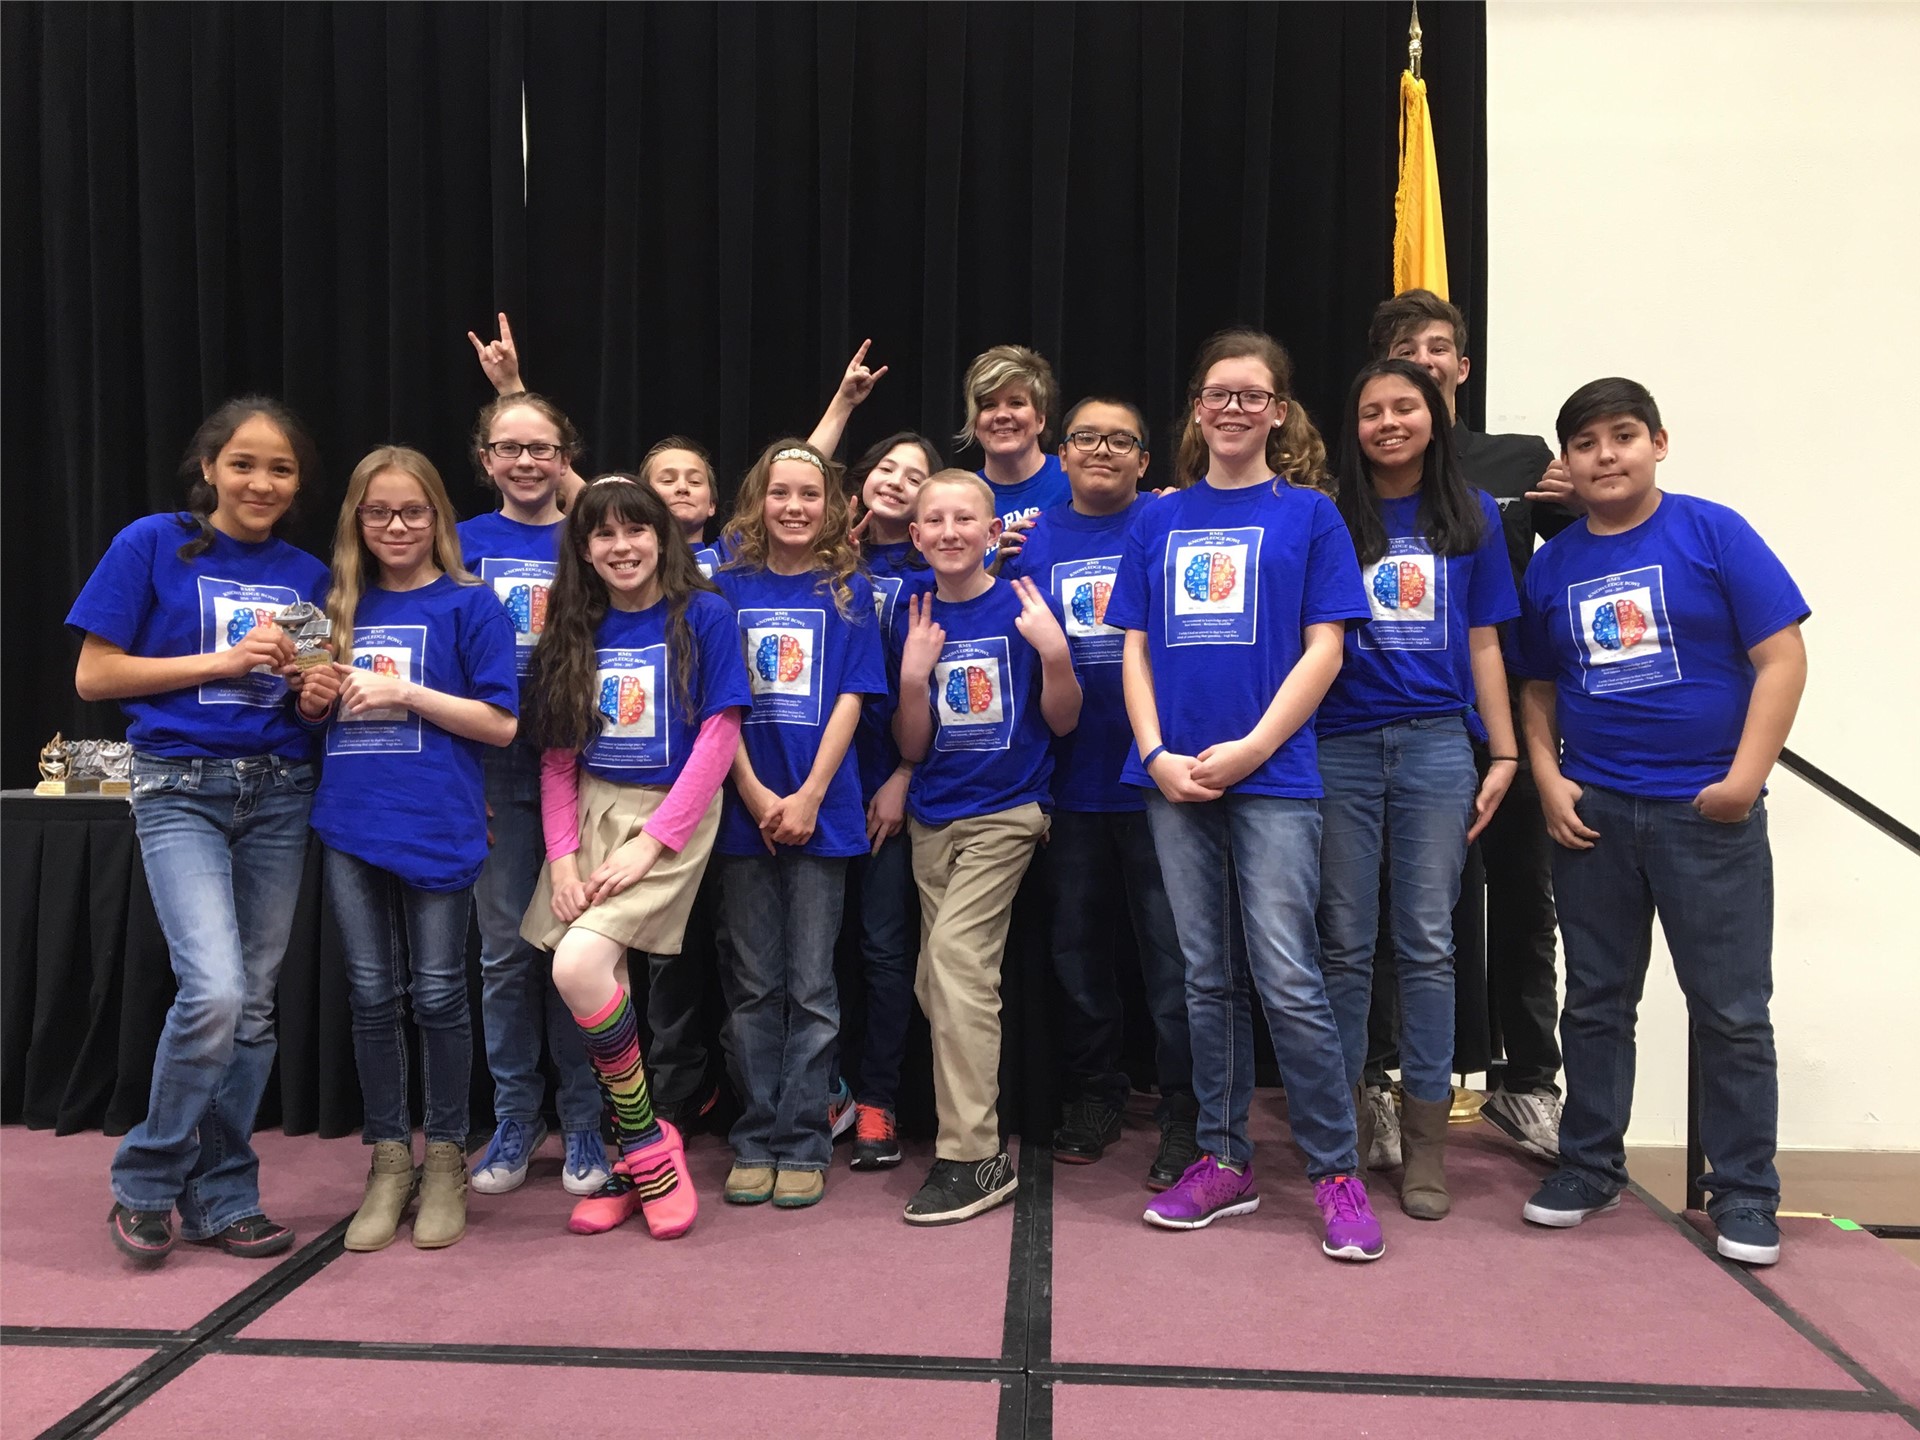 Ruidoso Middle School (RMS) Clubs and Activities: Knowledge Bowl